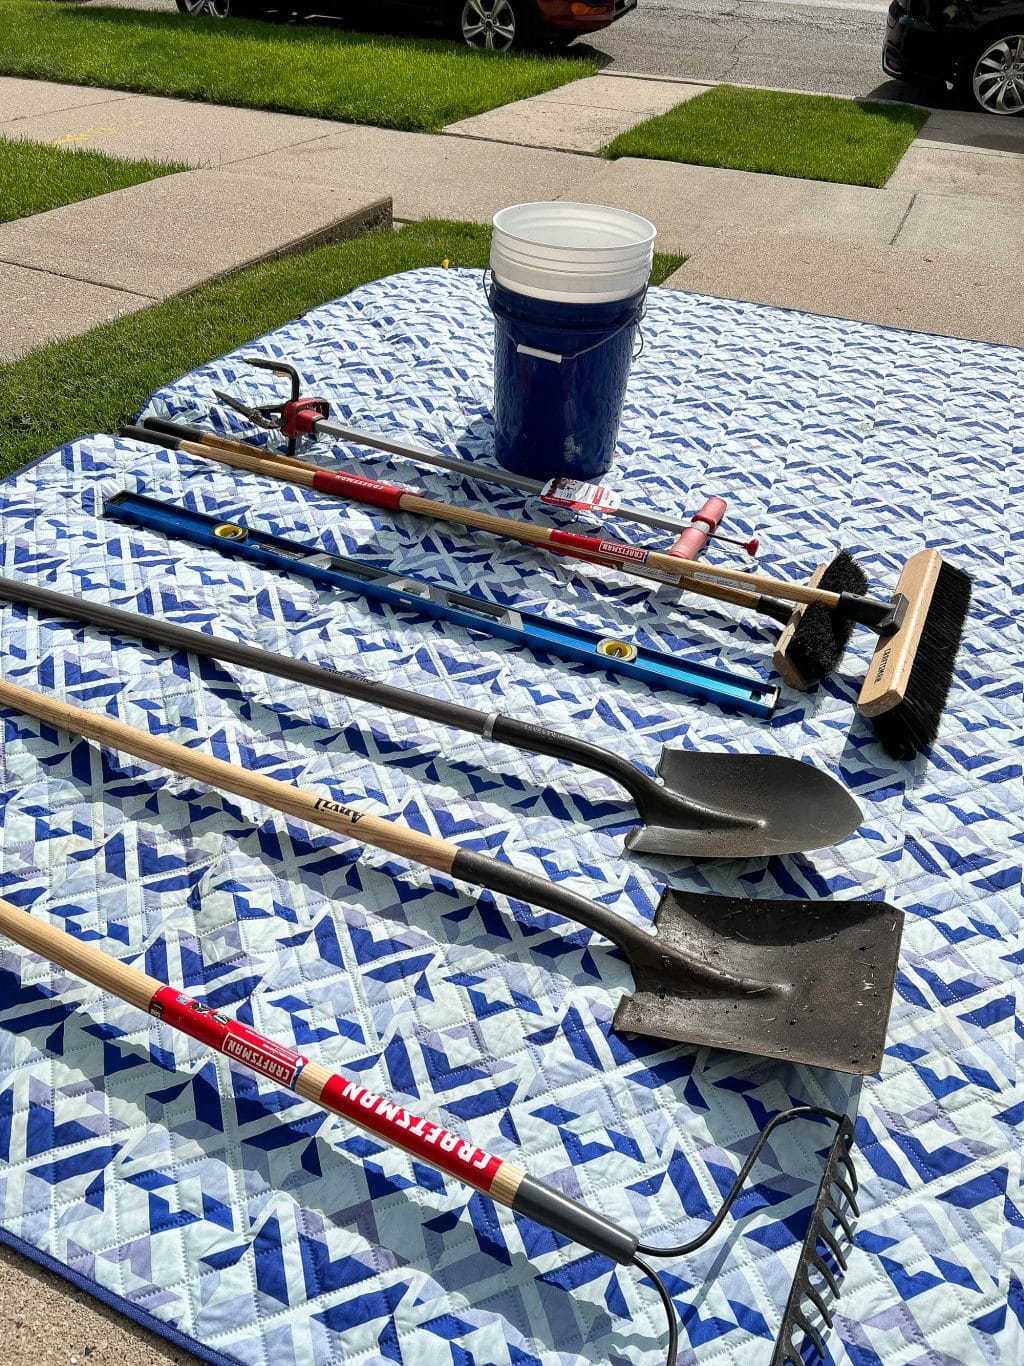 The tools we grabbed to create our pea gravel border